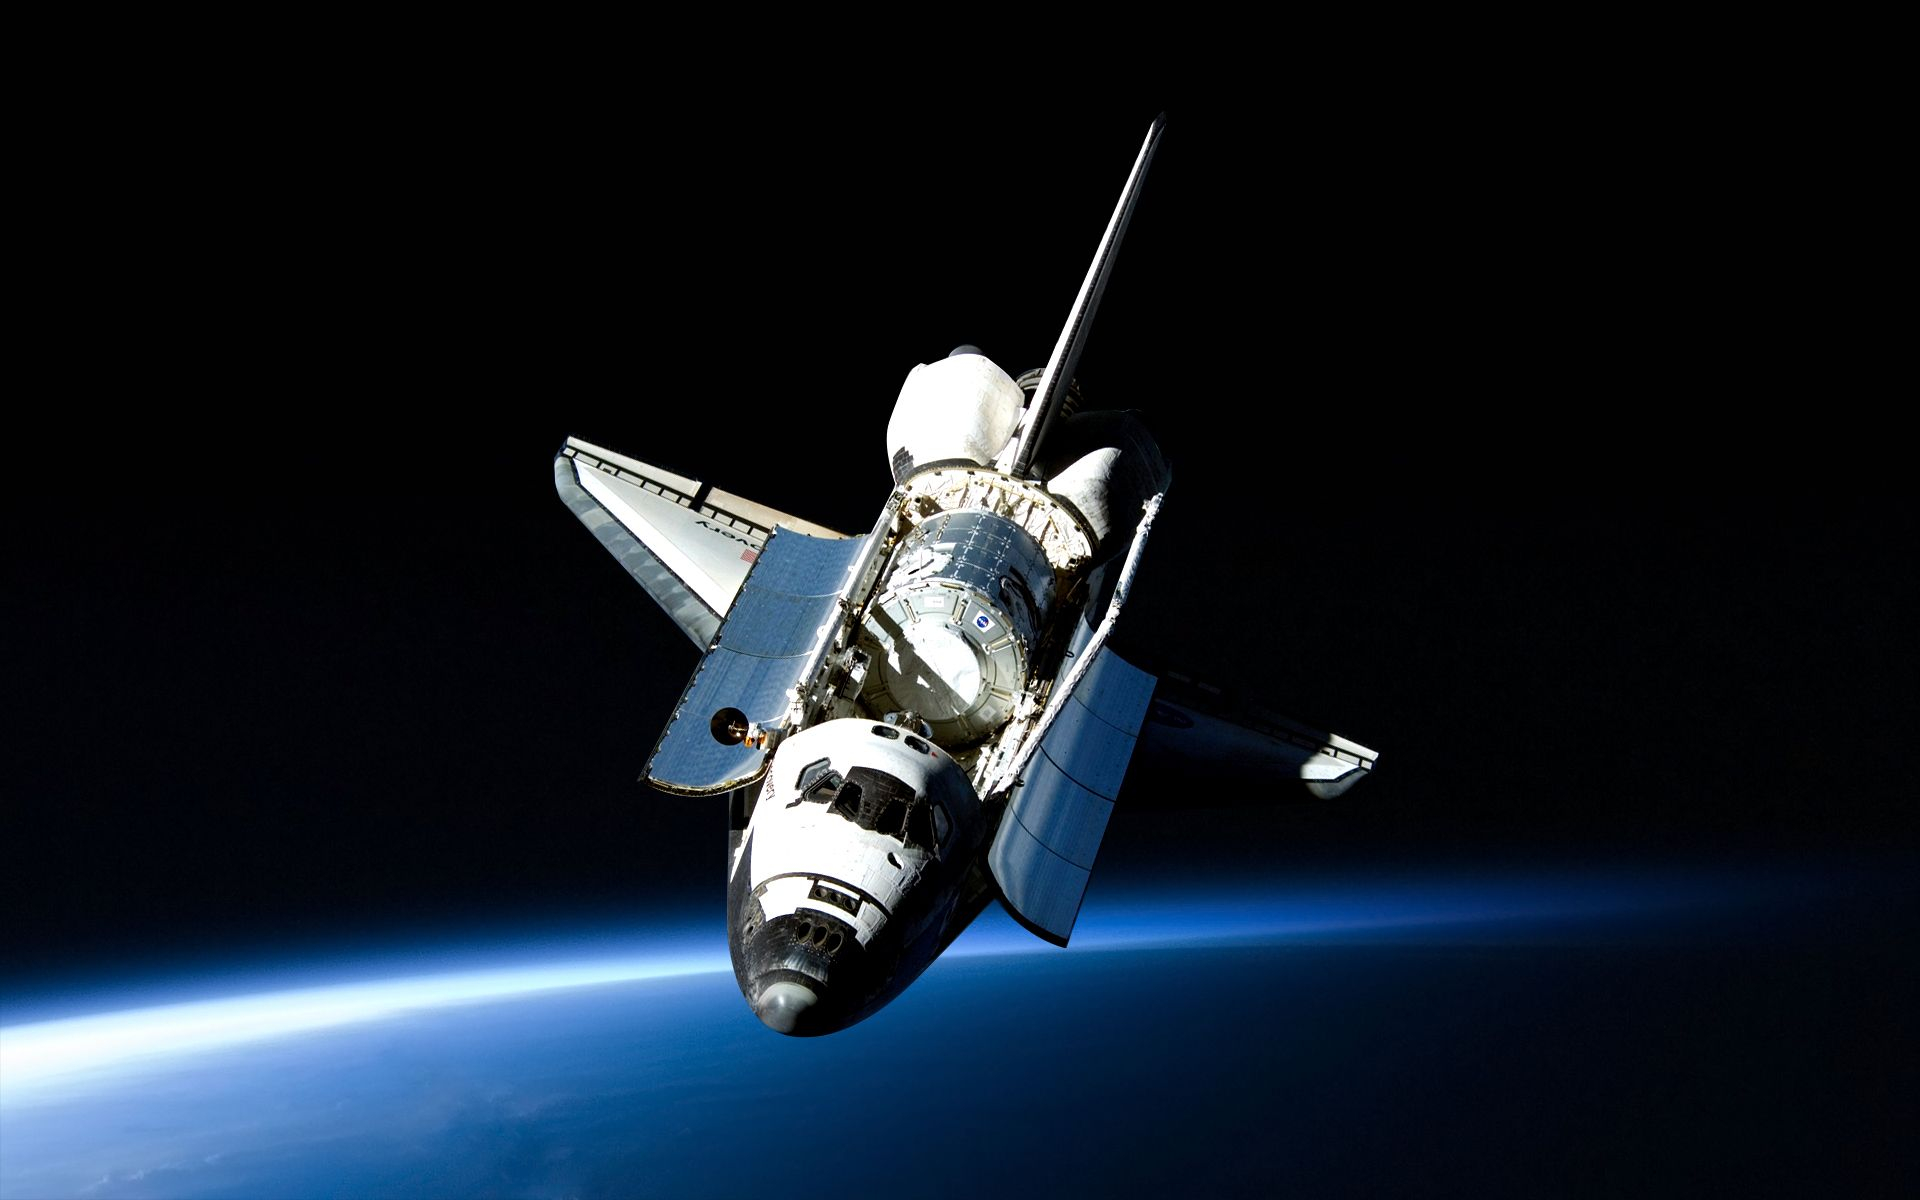 1920x1200 Space Shuttle Discovery posing for a great wallpaper. | Space shuttle, Nasa space shuttle, Space flight